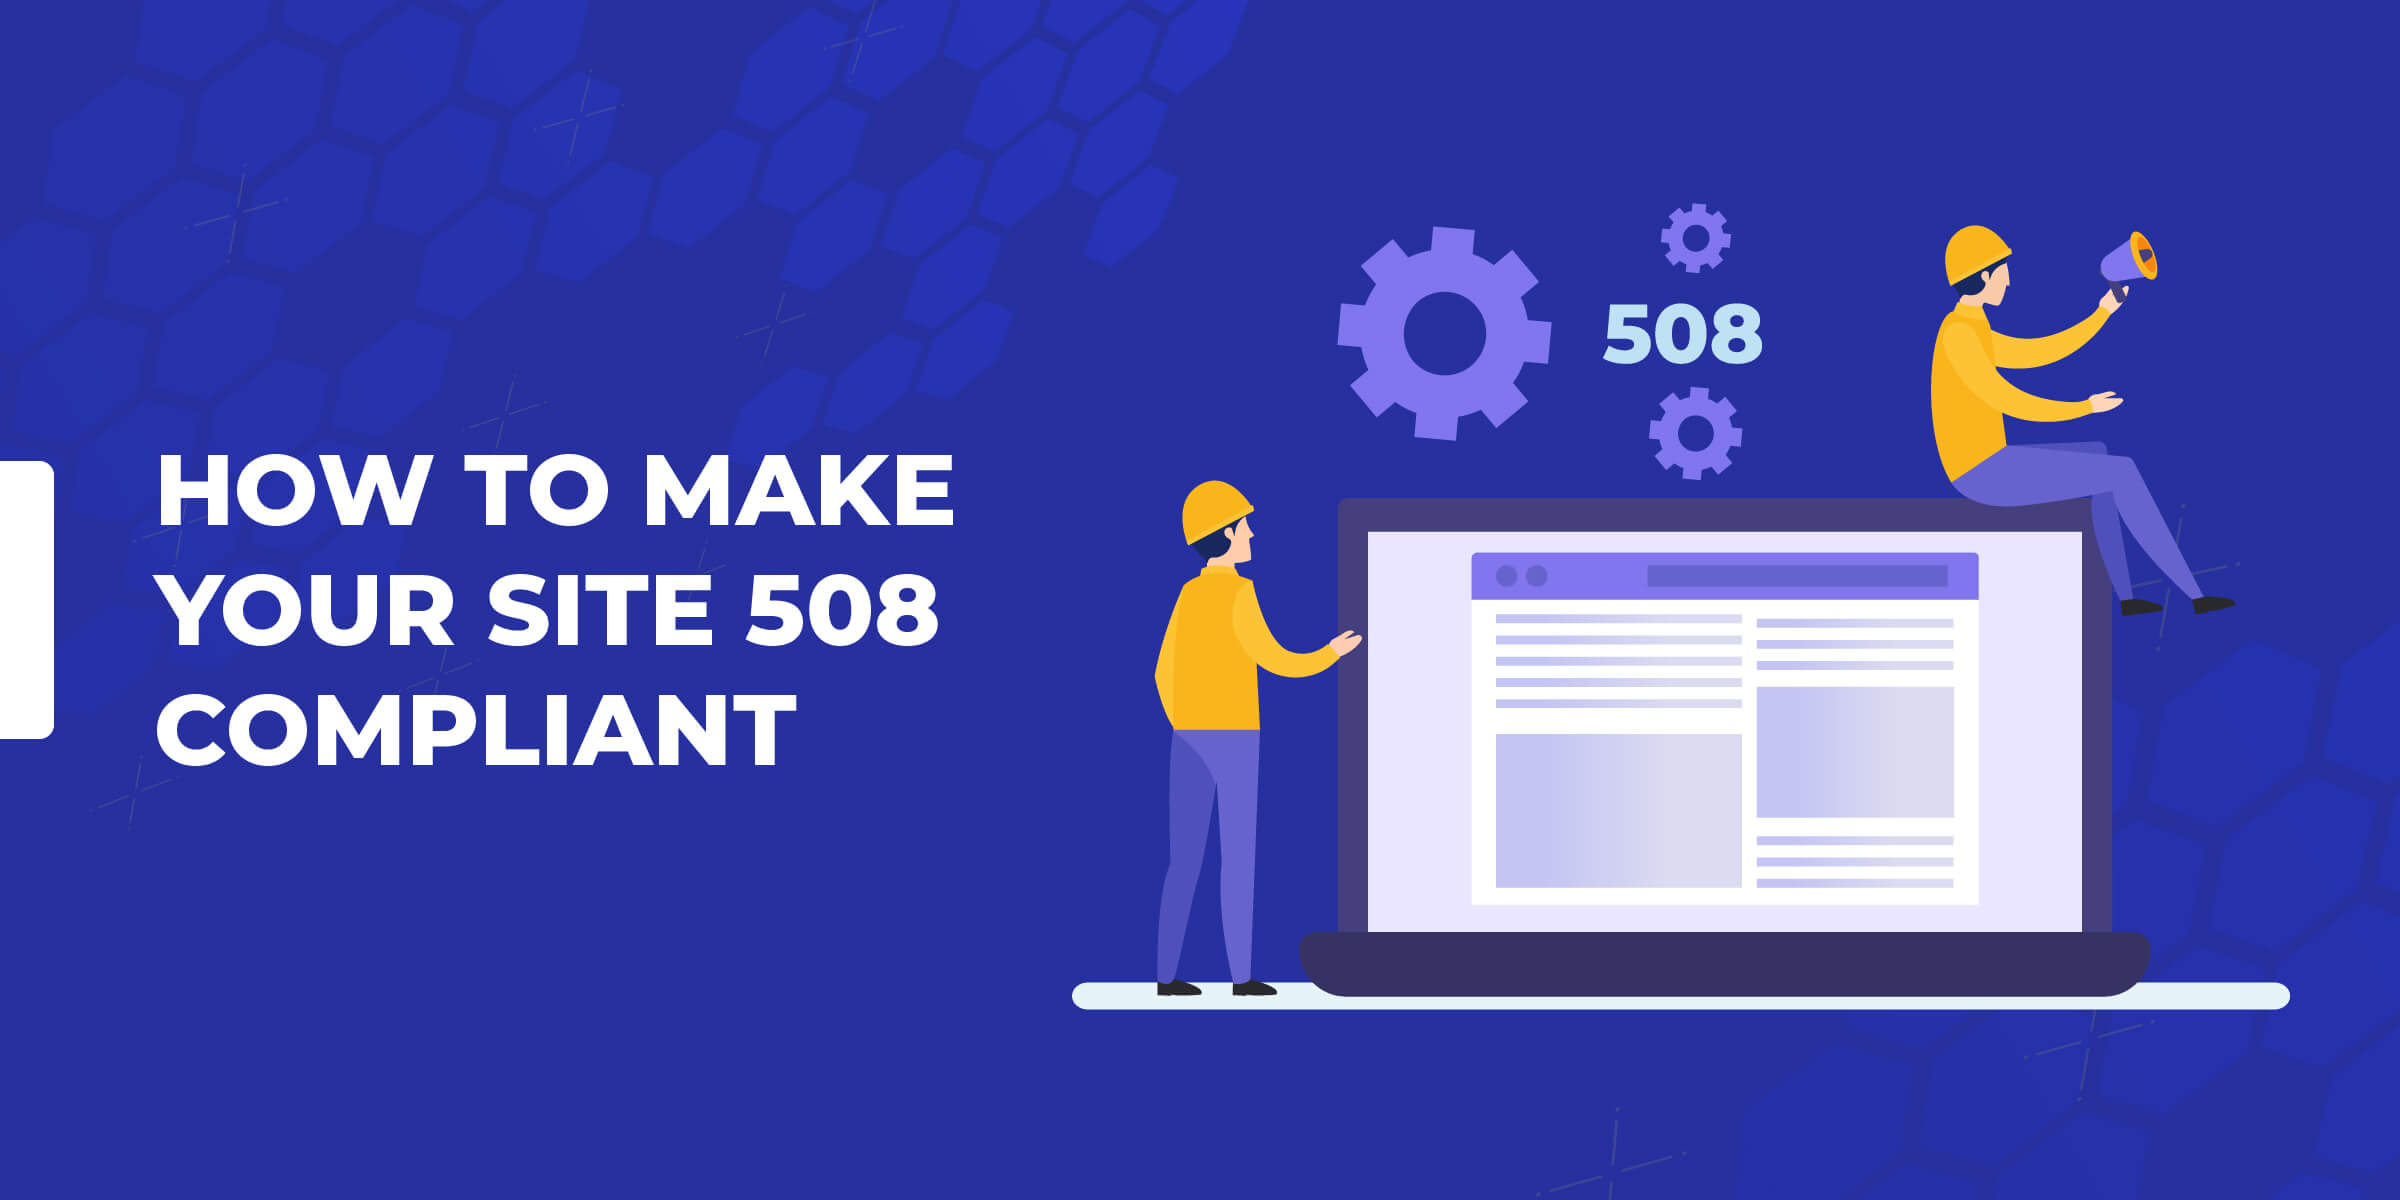 How to Make Your Site 508 Compliant